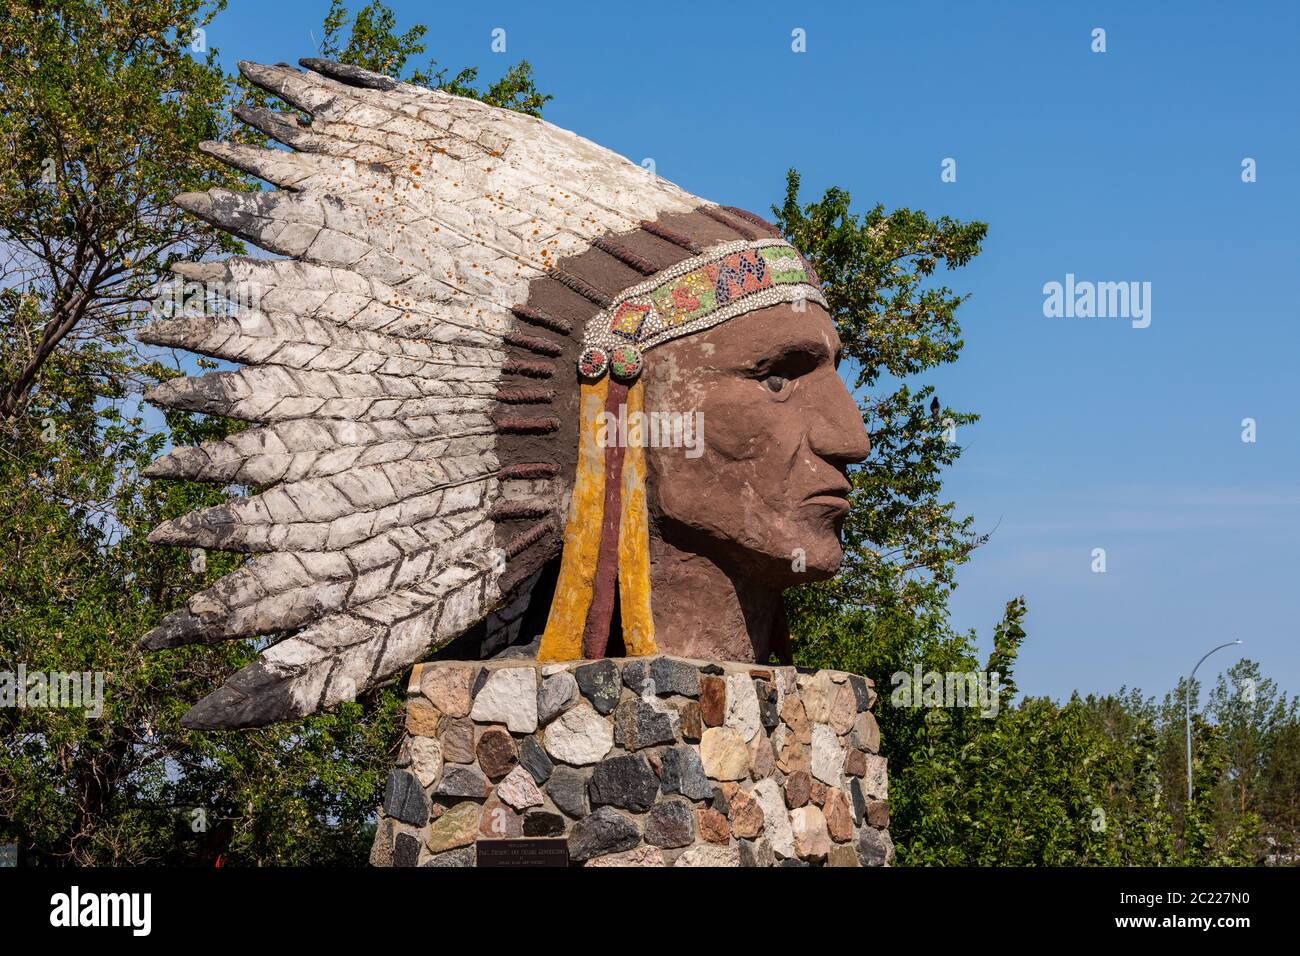 Indian Head Sculpture in Canada Stock Photo